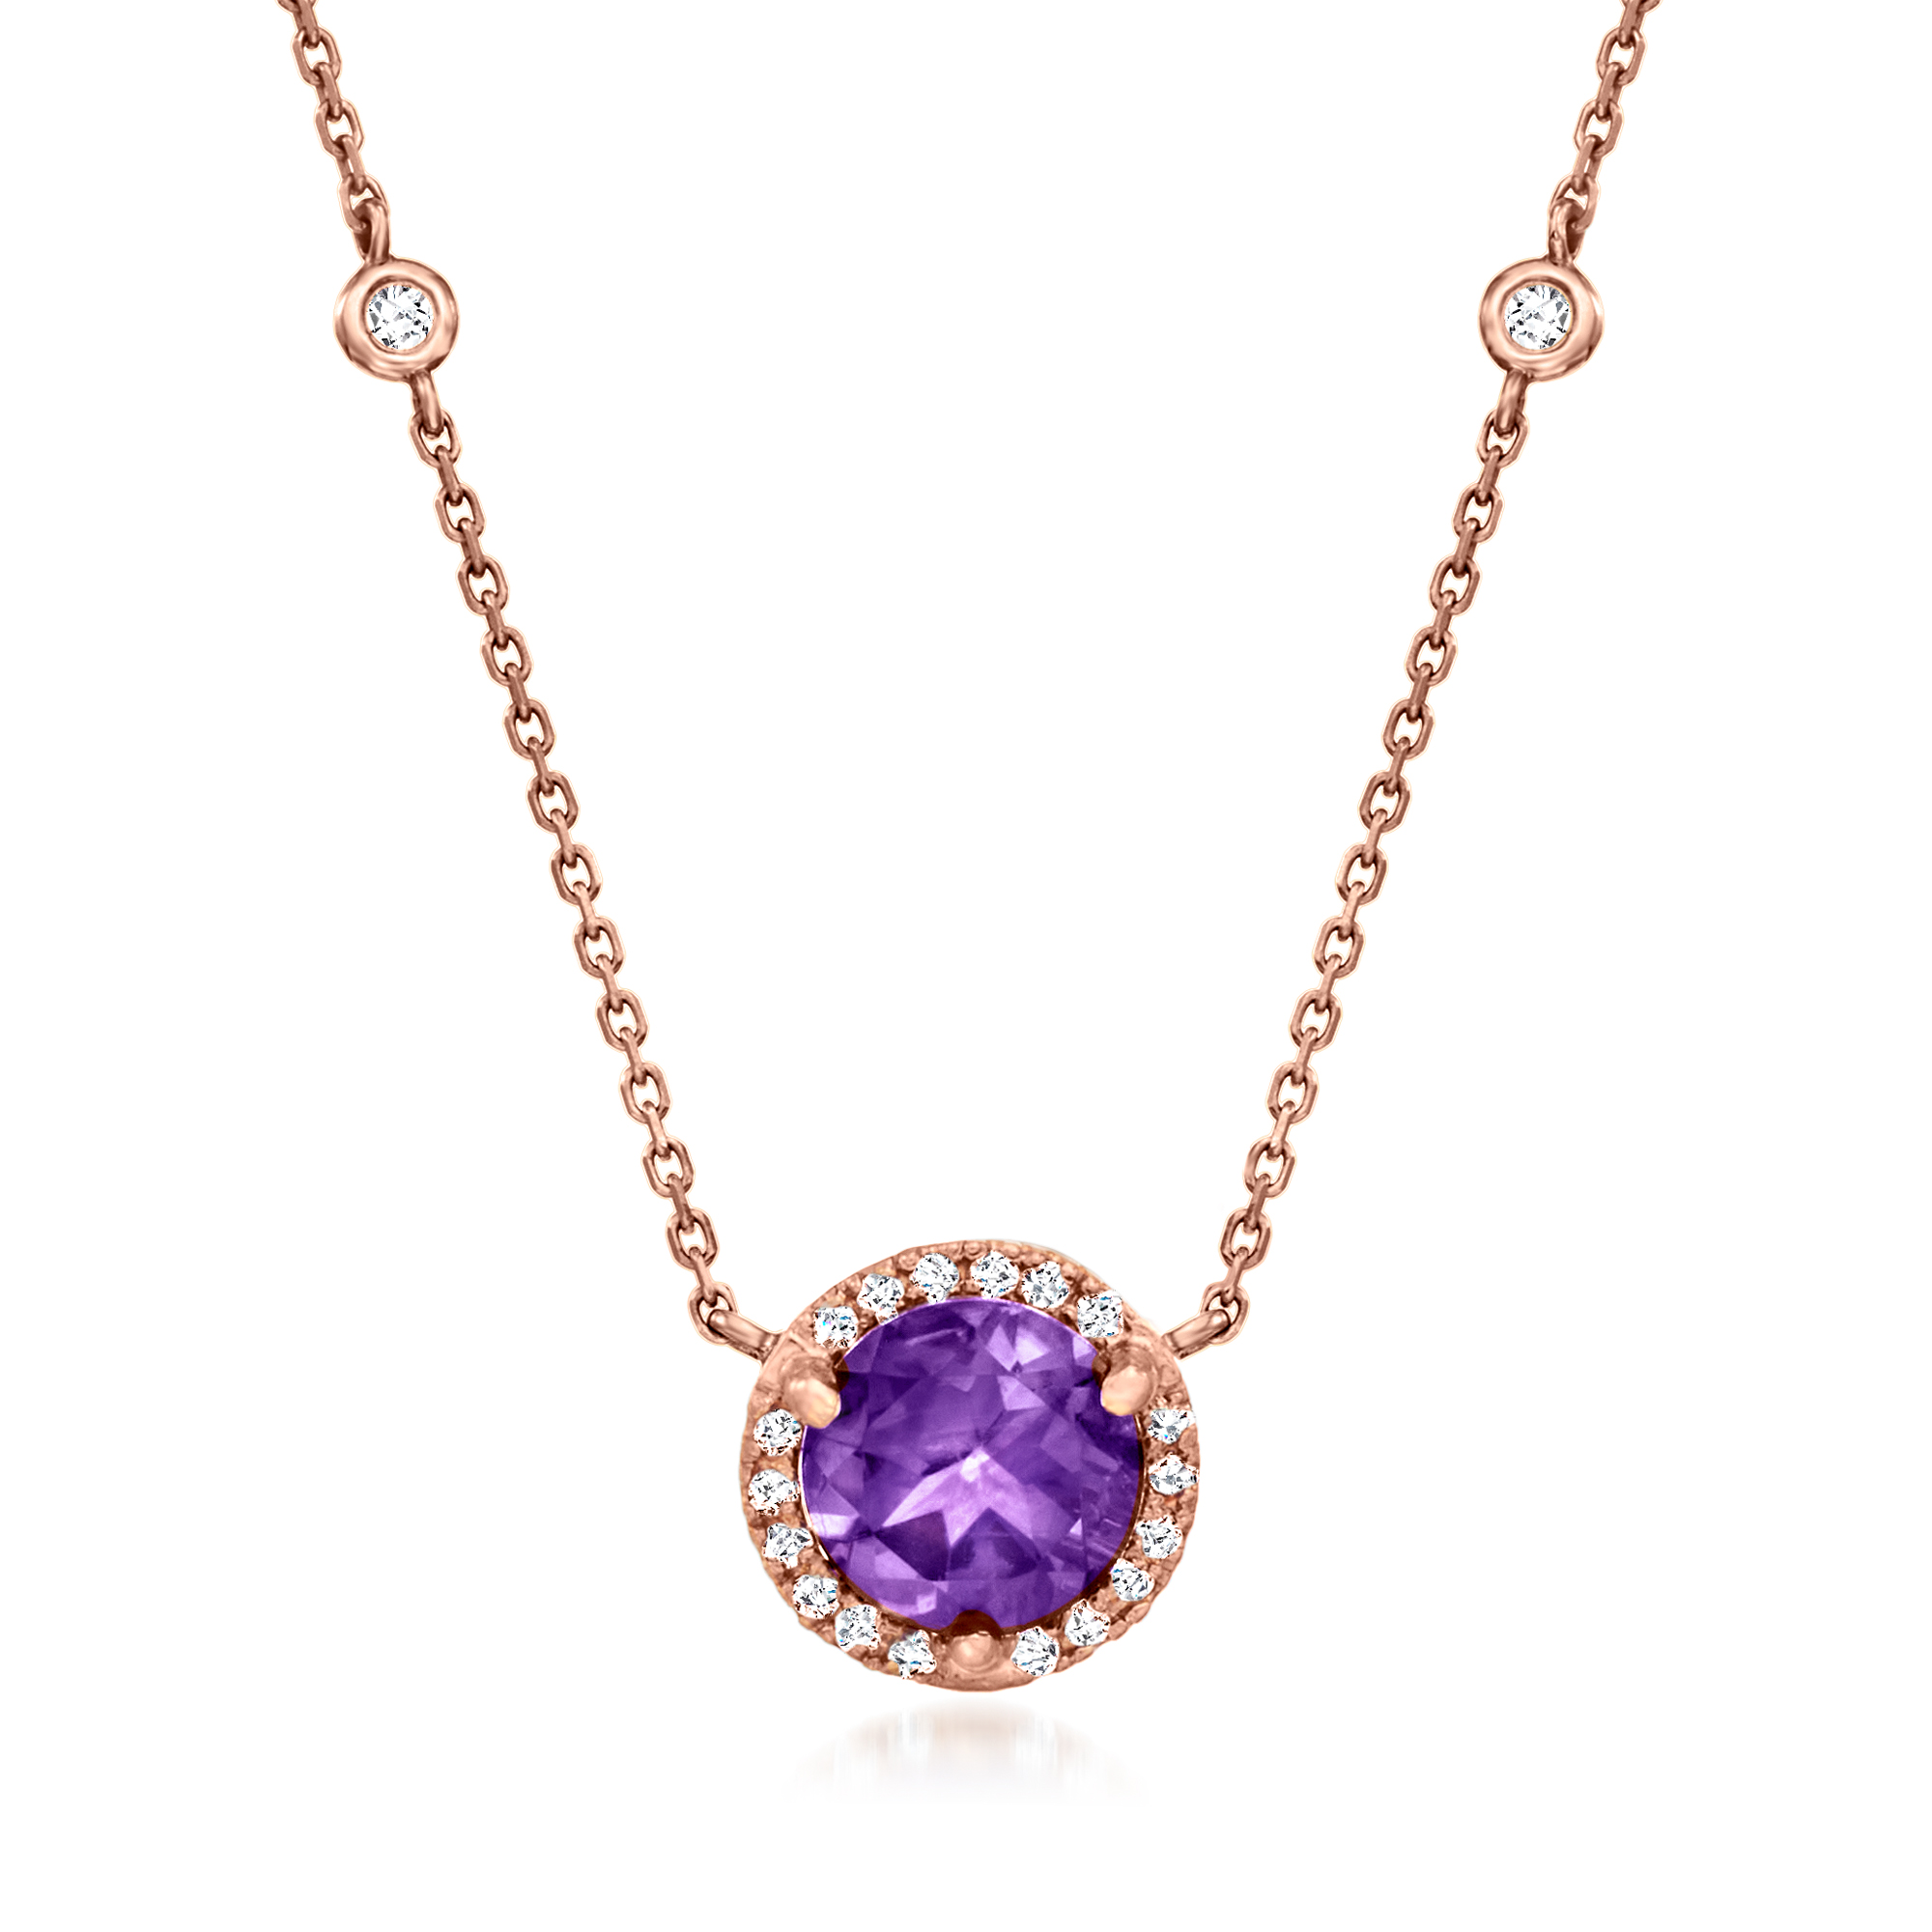 2.00 Carat Amethyst and .18 ct. t.w. Diamond Halo Pendant Necklace in 14kt Rose  Gold. 17" | Ross-Simons